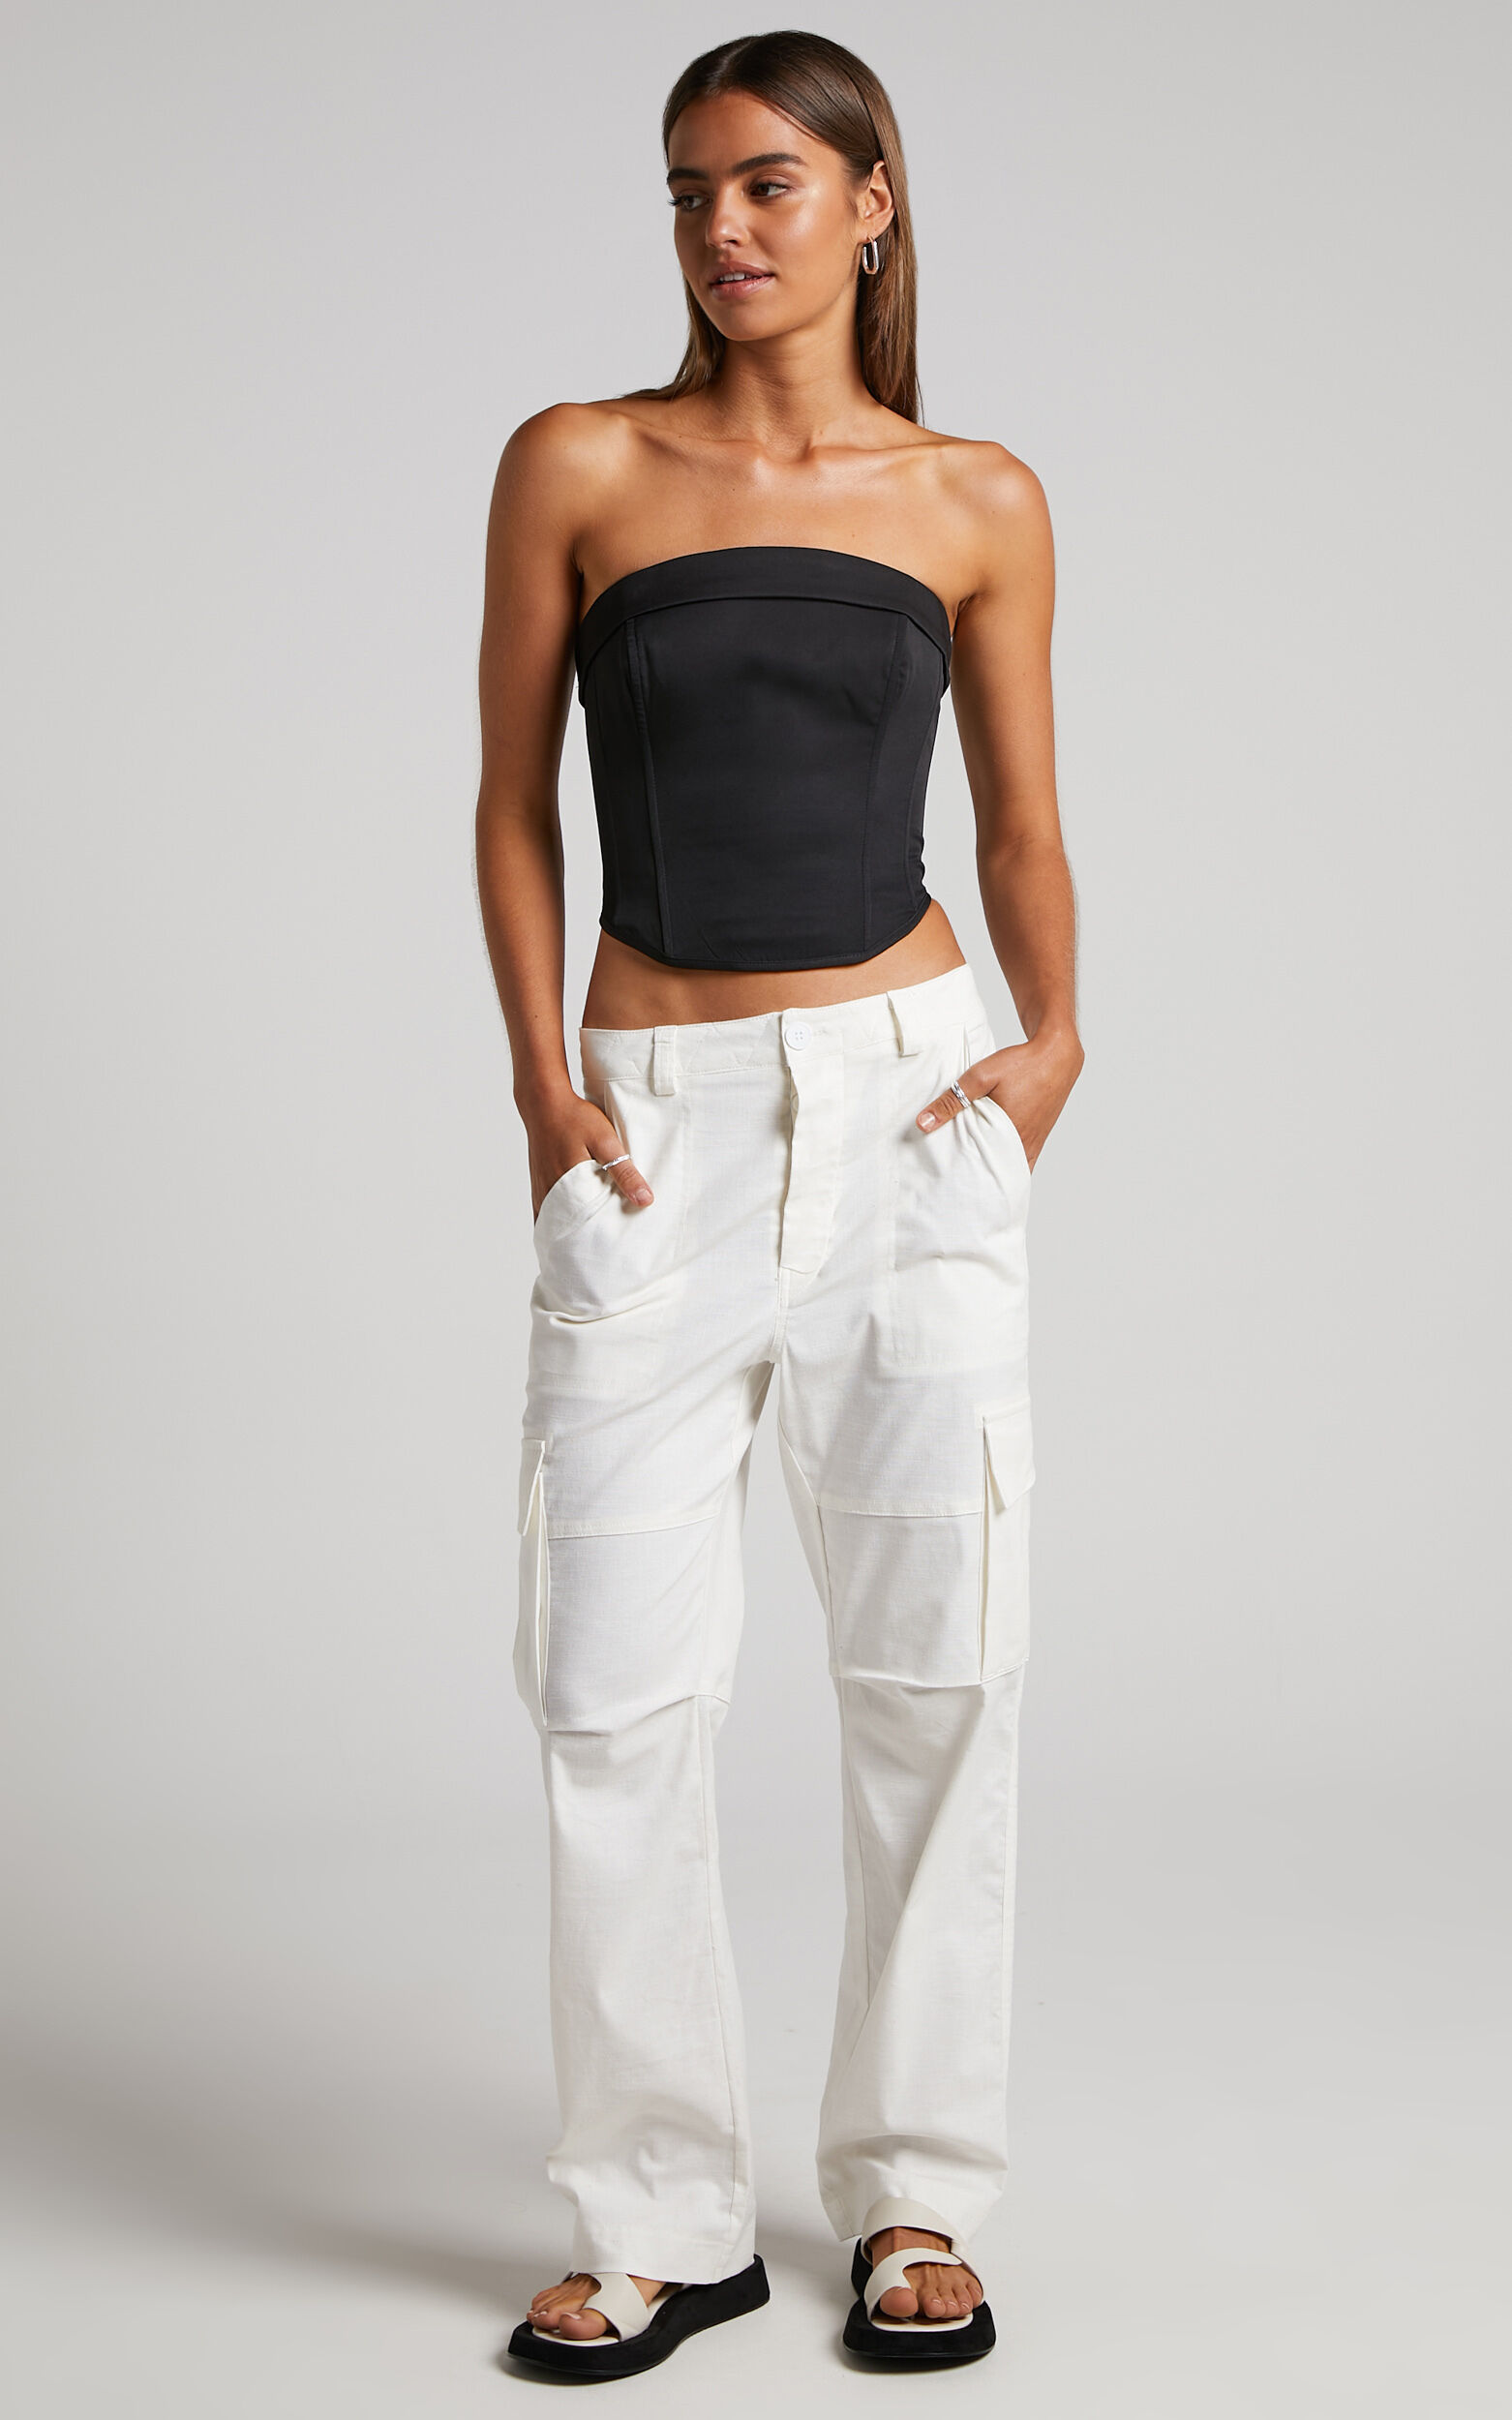 Reveey Pants - Low Rise Cargo Pants in White - 04, WHT1, super-hi-res image number null